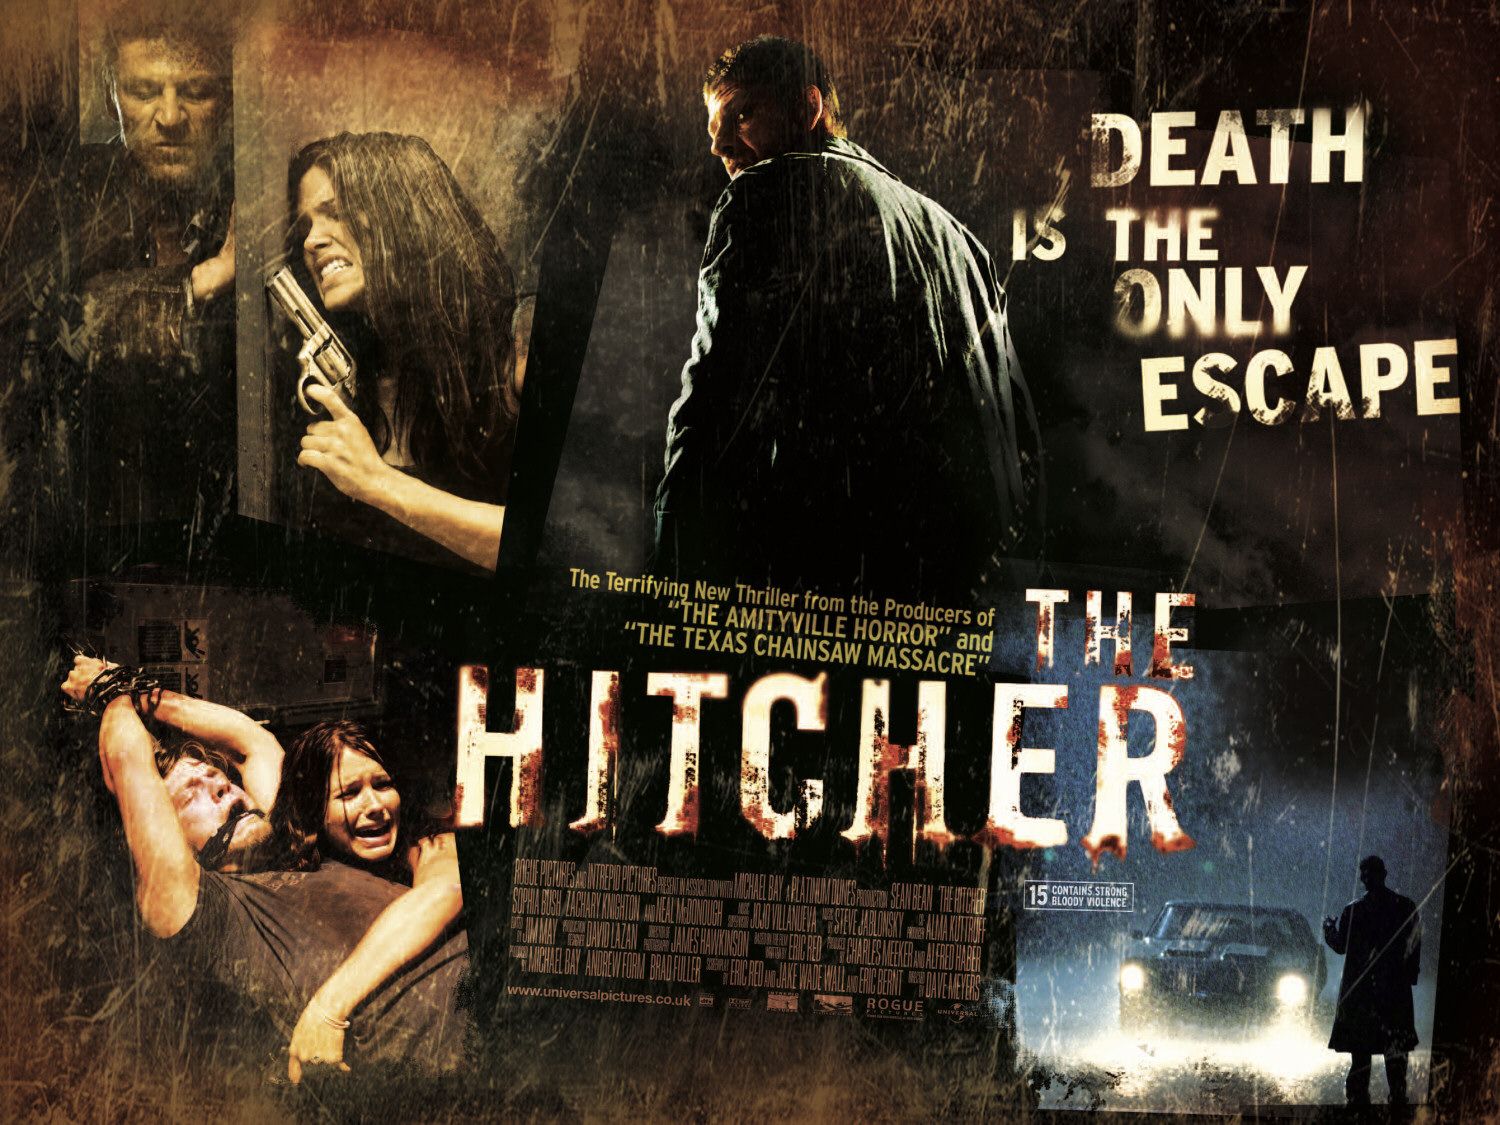 Extra Large Movie Poster Image for The Hitcher (#5 of 7)